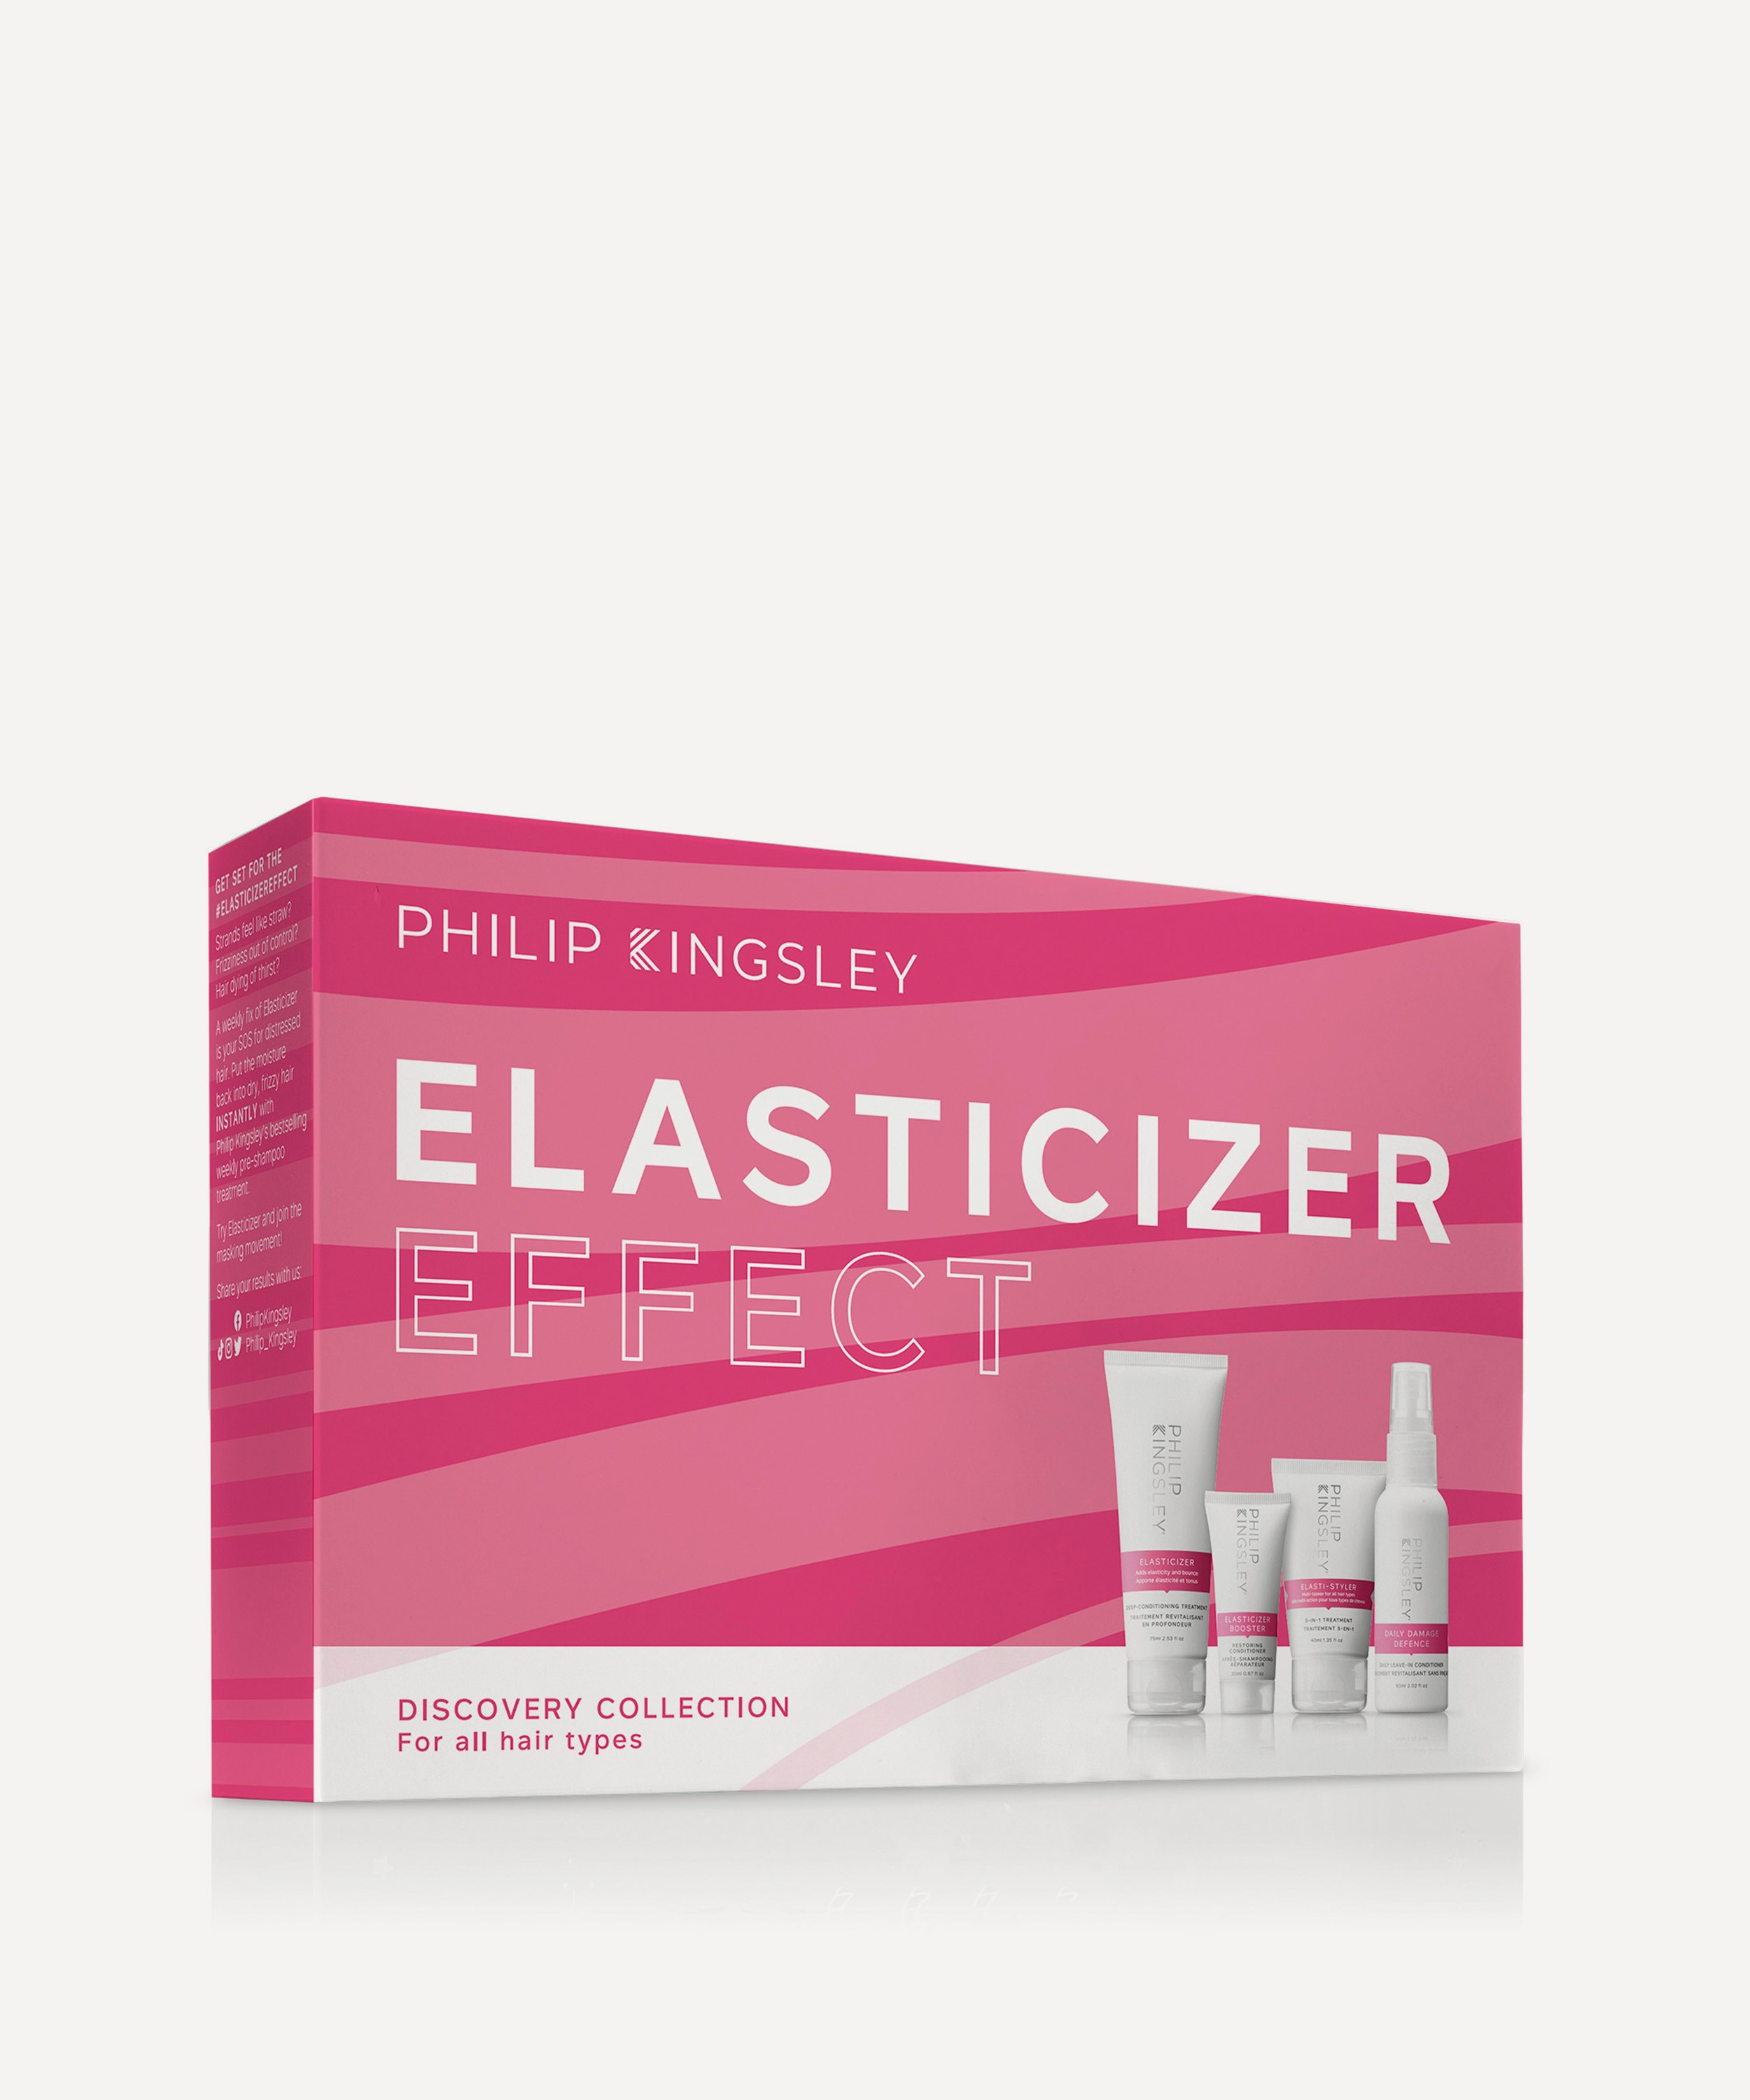 Philip Kingsley - Elasticizer Discovery Collection